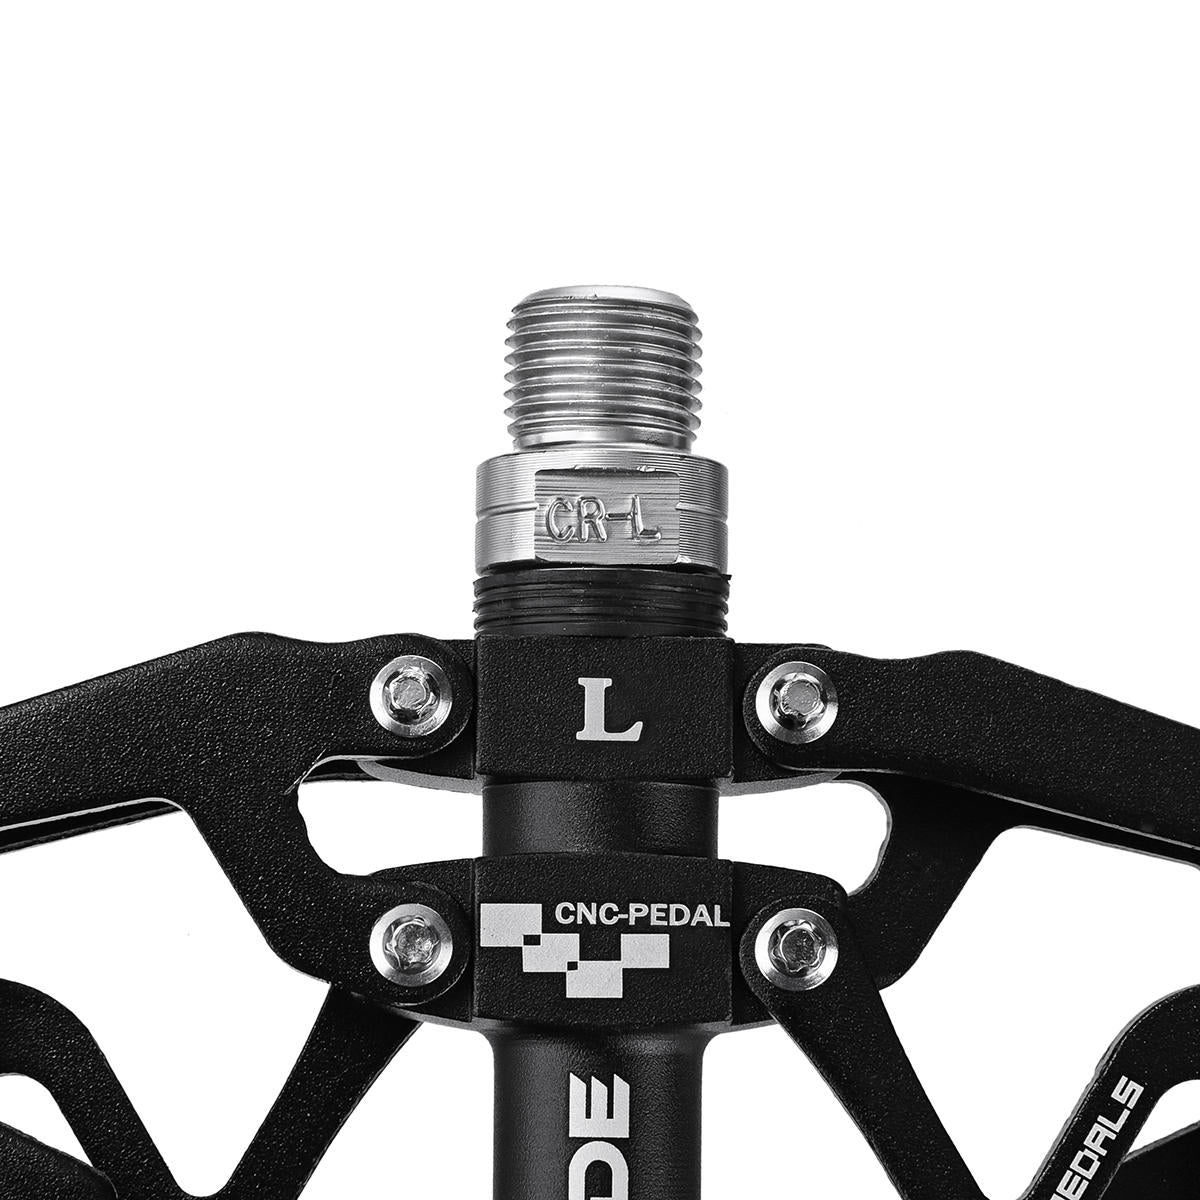 1 Pair Anti-slip Bike Pedals 3 Bearing Aluminum Alloy Cycling Bicycle Platform  Bicycle Pedal Bike Accessories Part for Road bmx Mtb Bicycle